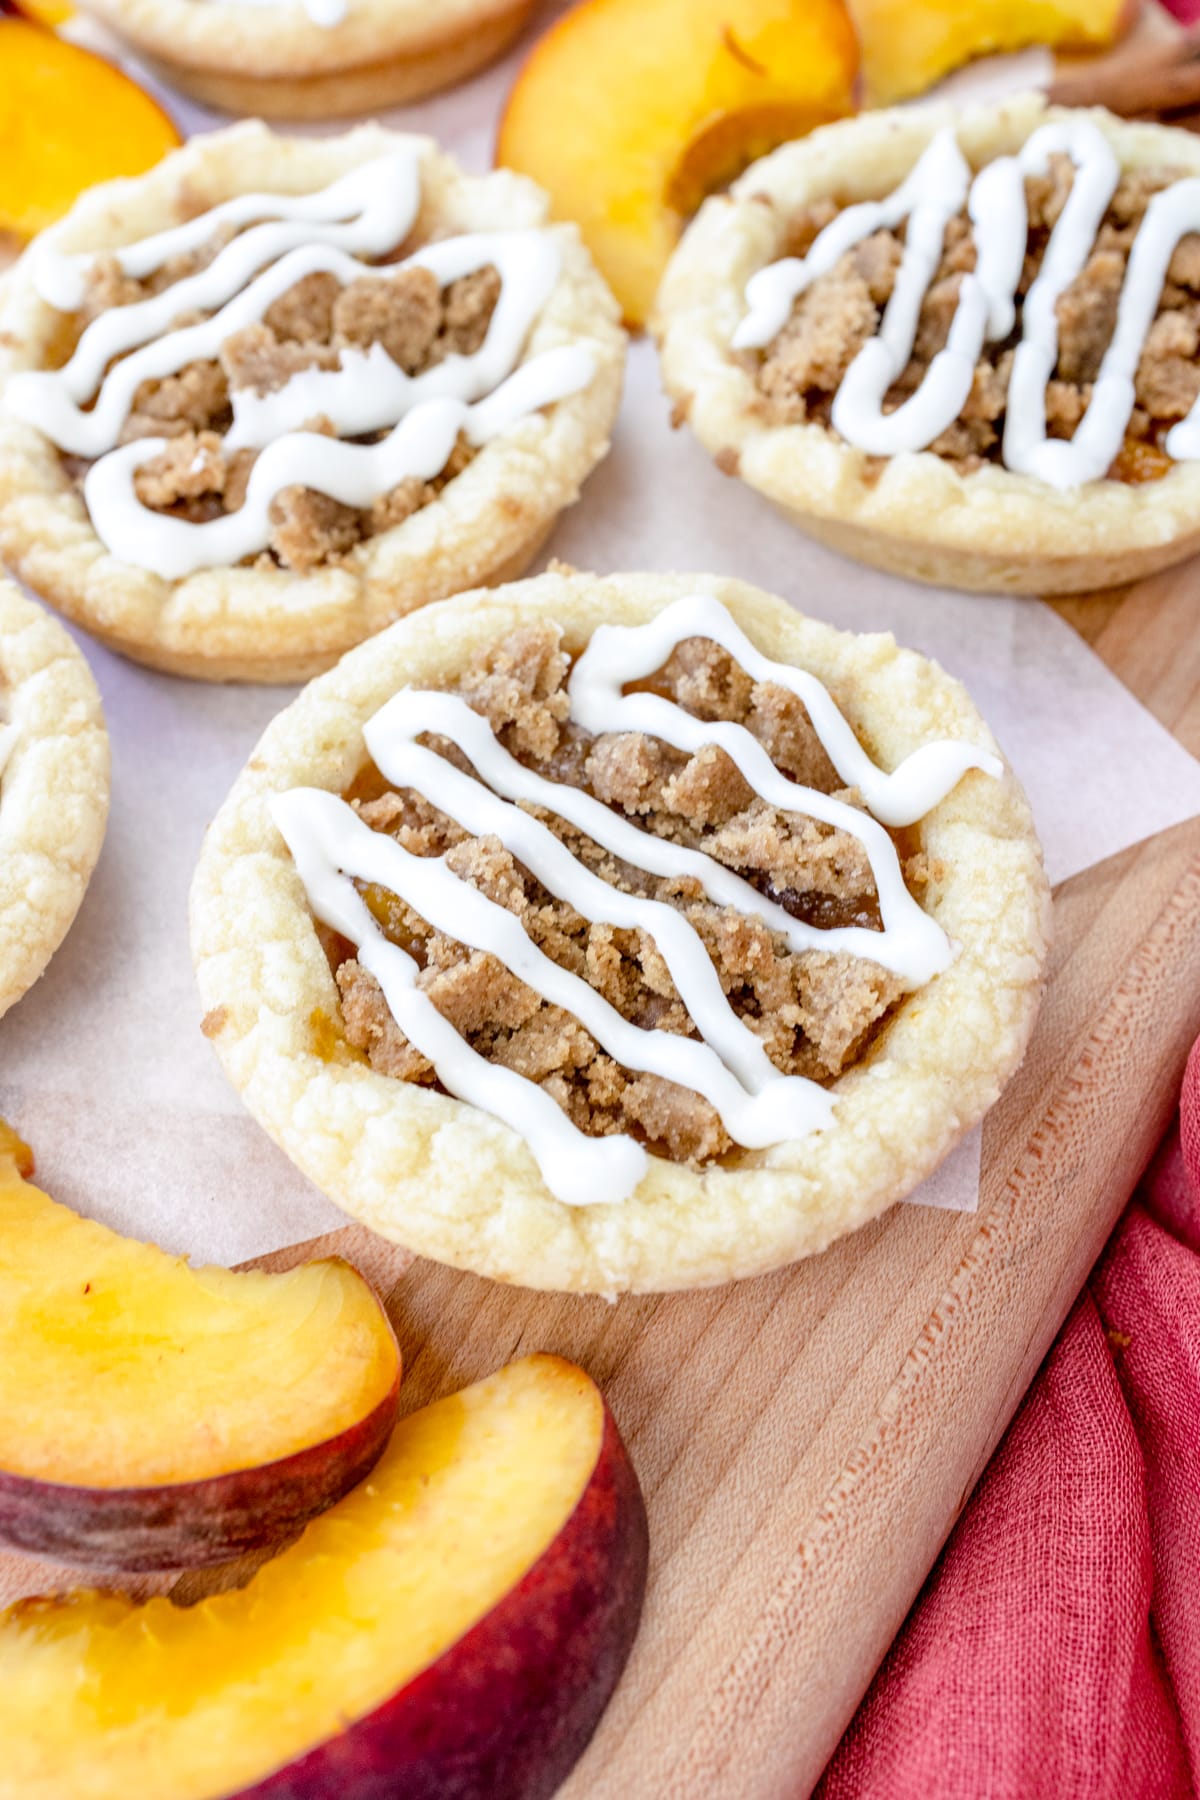 Peach cobbler cookies on a white surface with peach slices around them.